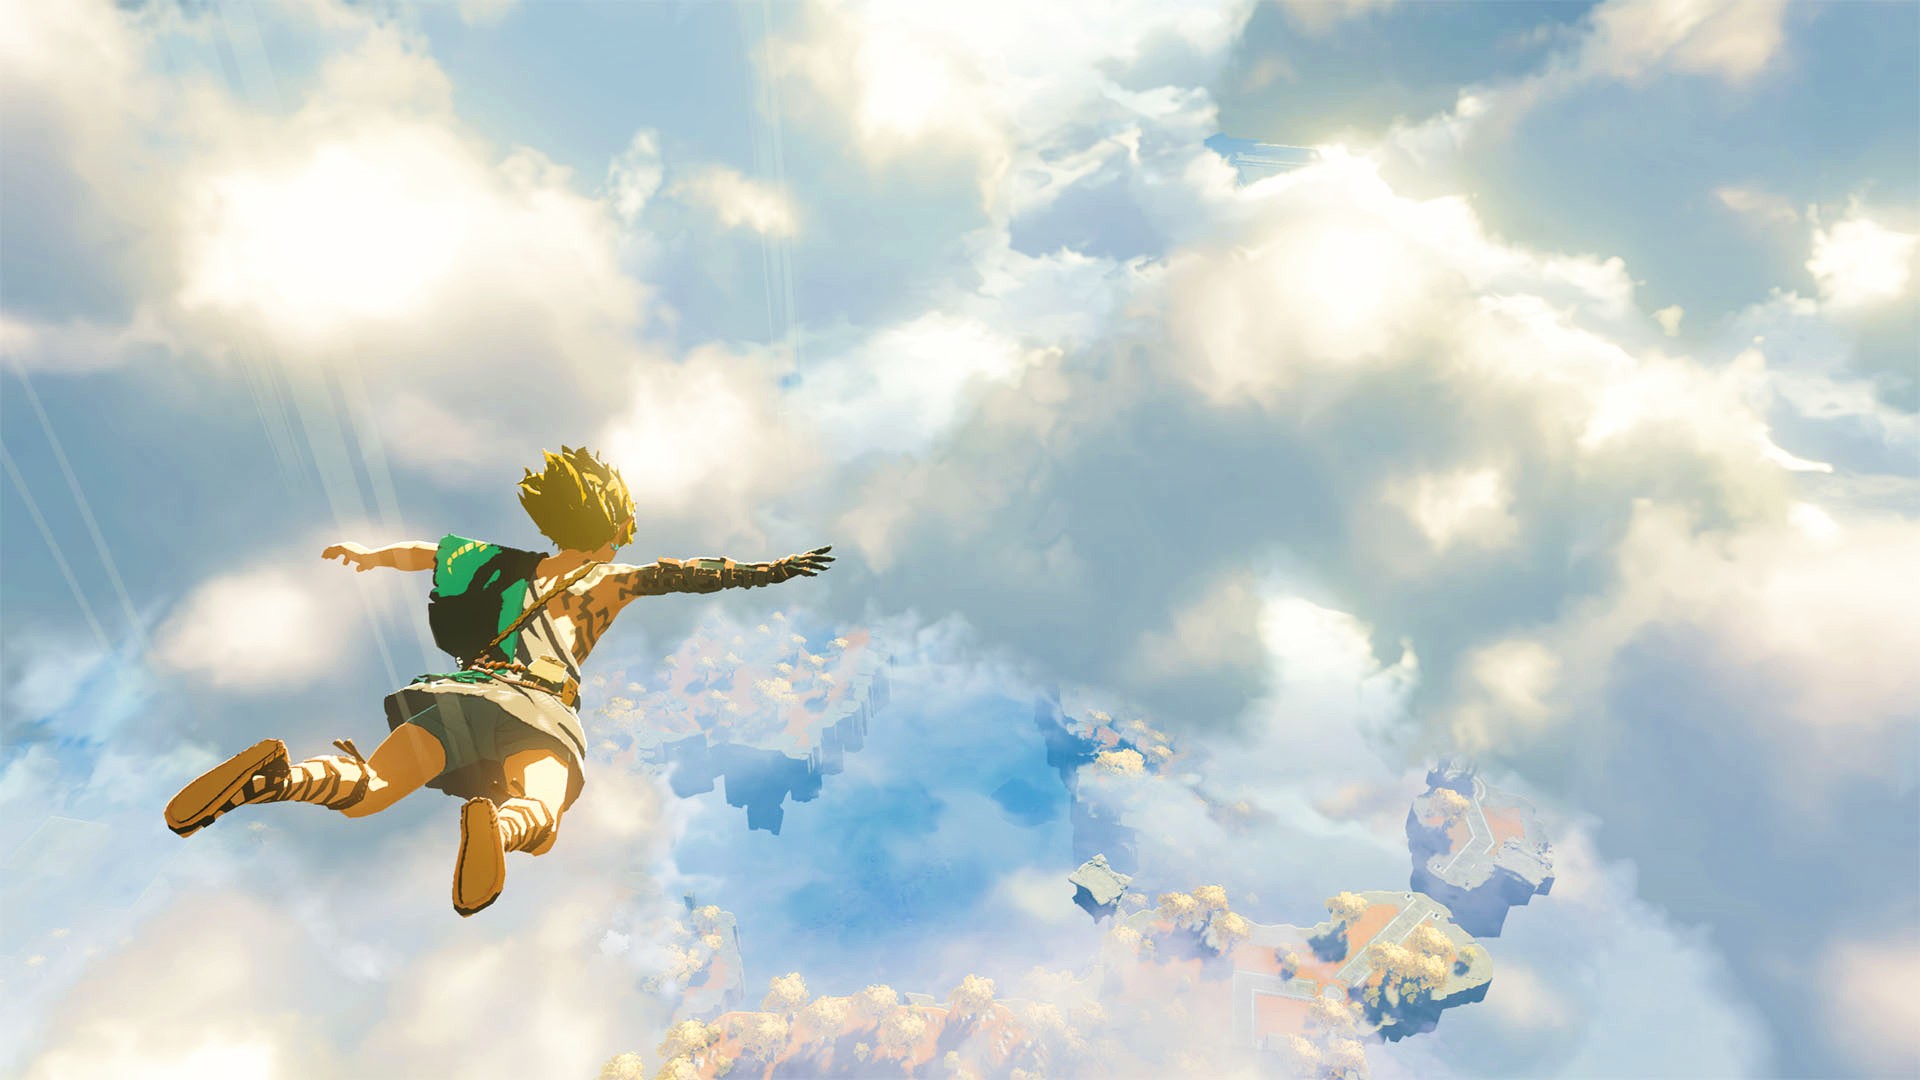 breath of the wild 2 hero link dives through clouds in the sky